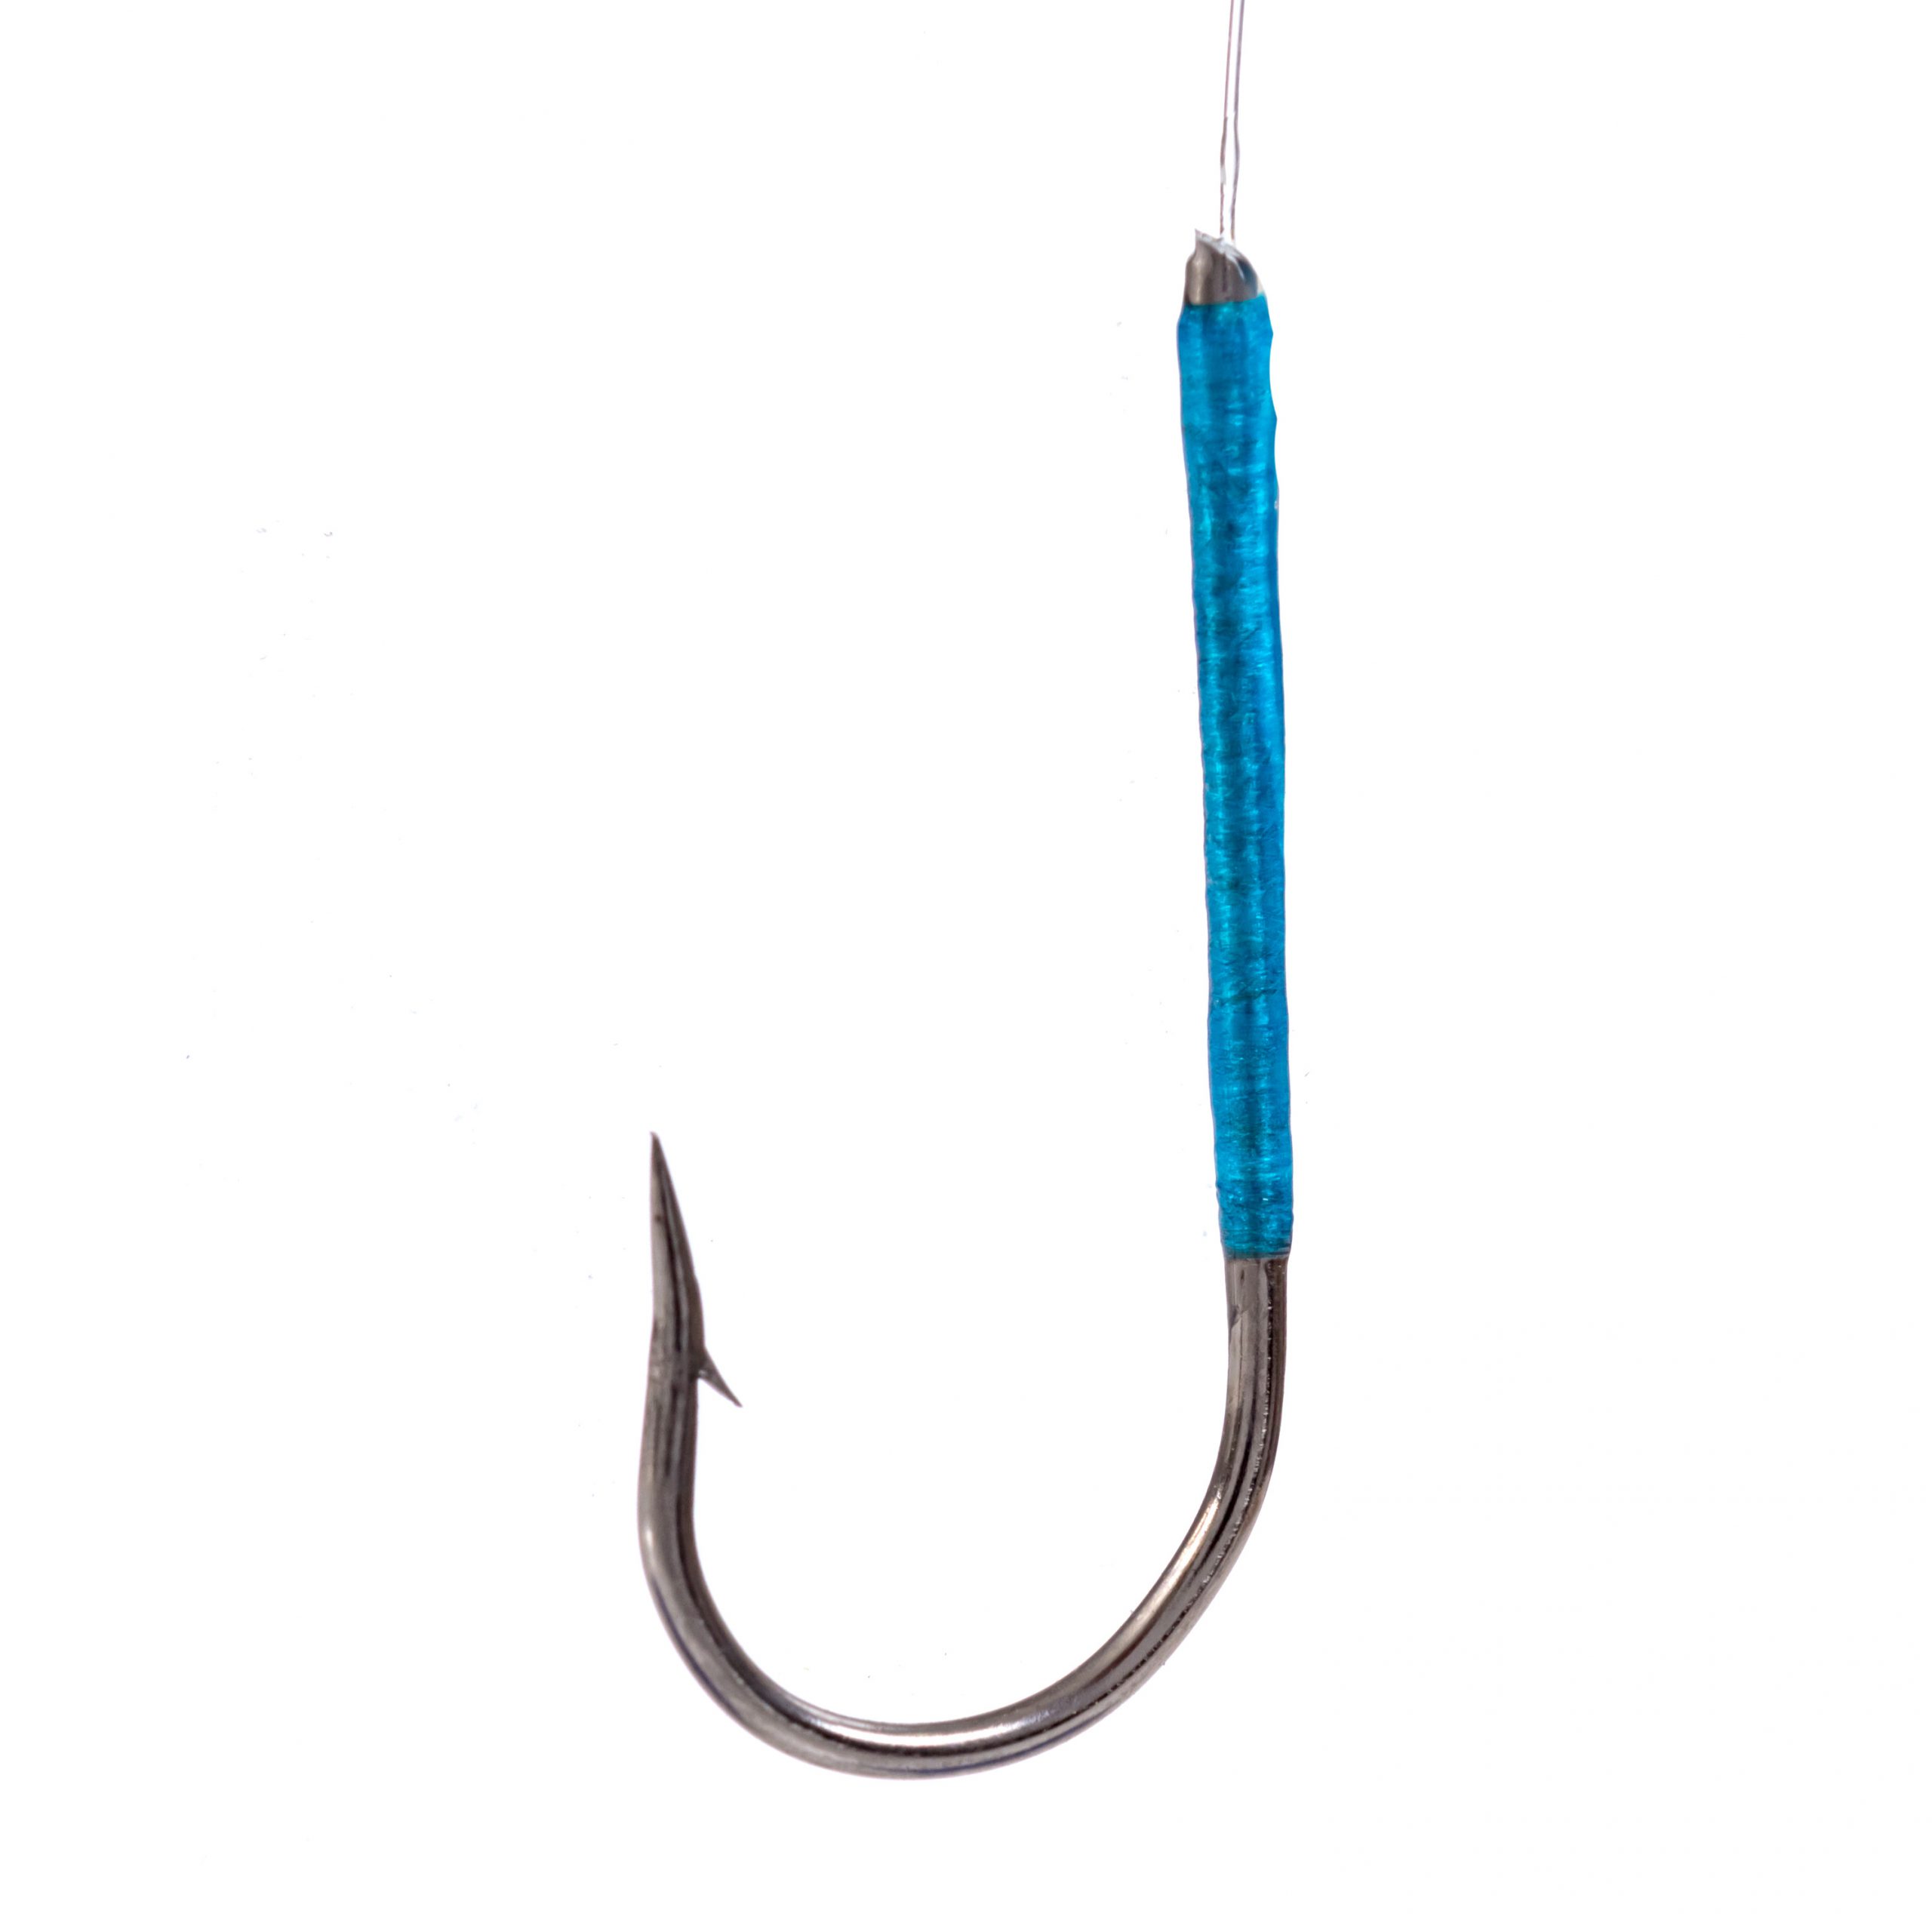 https://www.maineproseries.com/wp-content/uploads/2020/01/sewing-bait-hook-leader-blue-goose-scaled.jpg